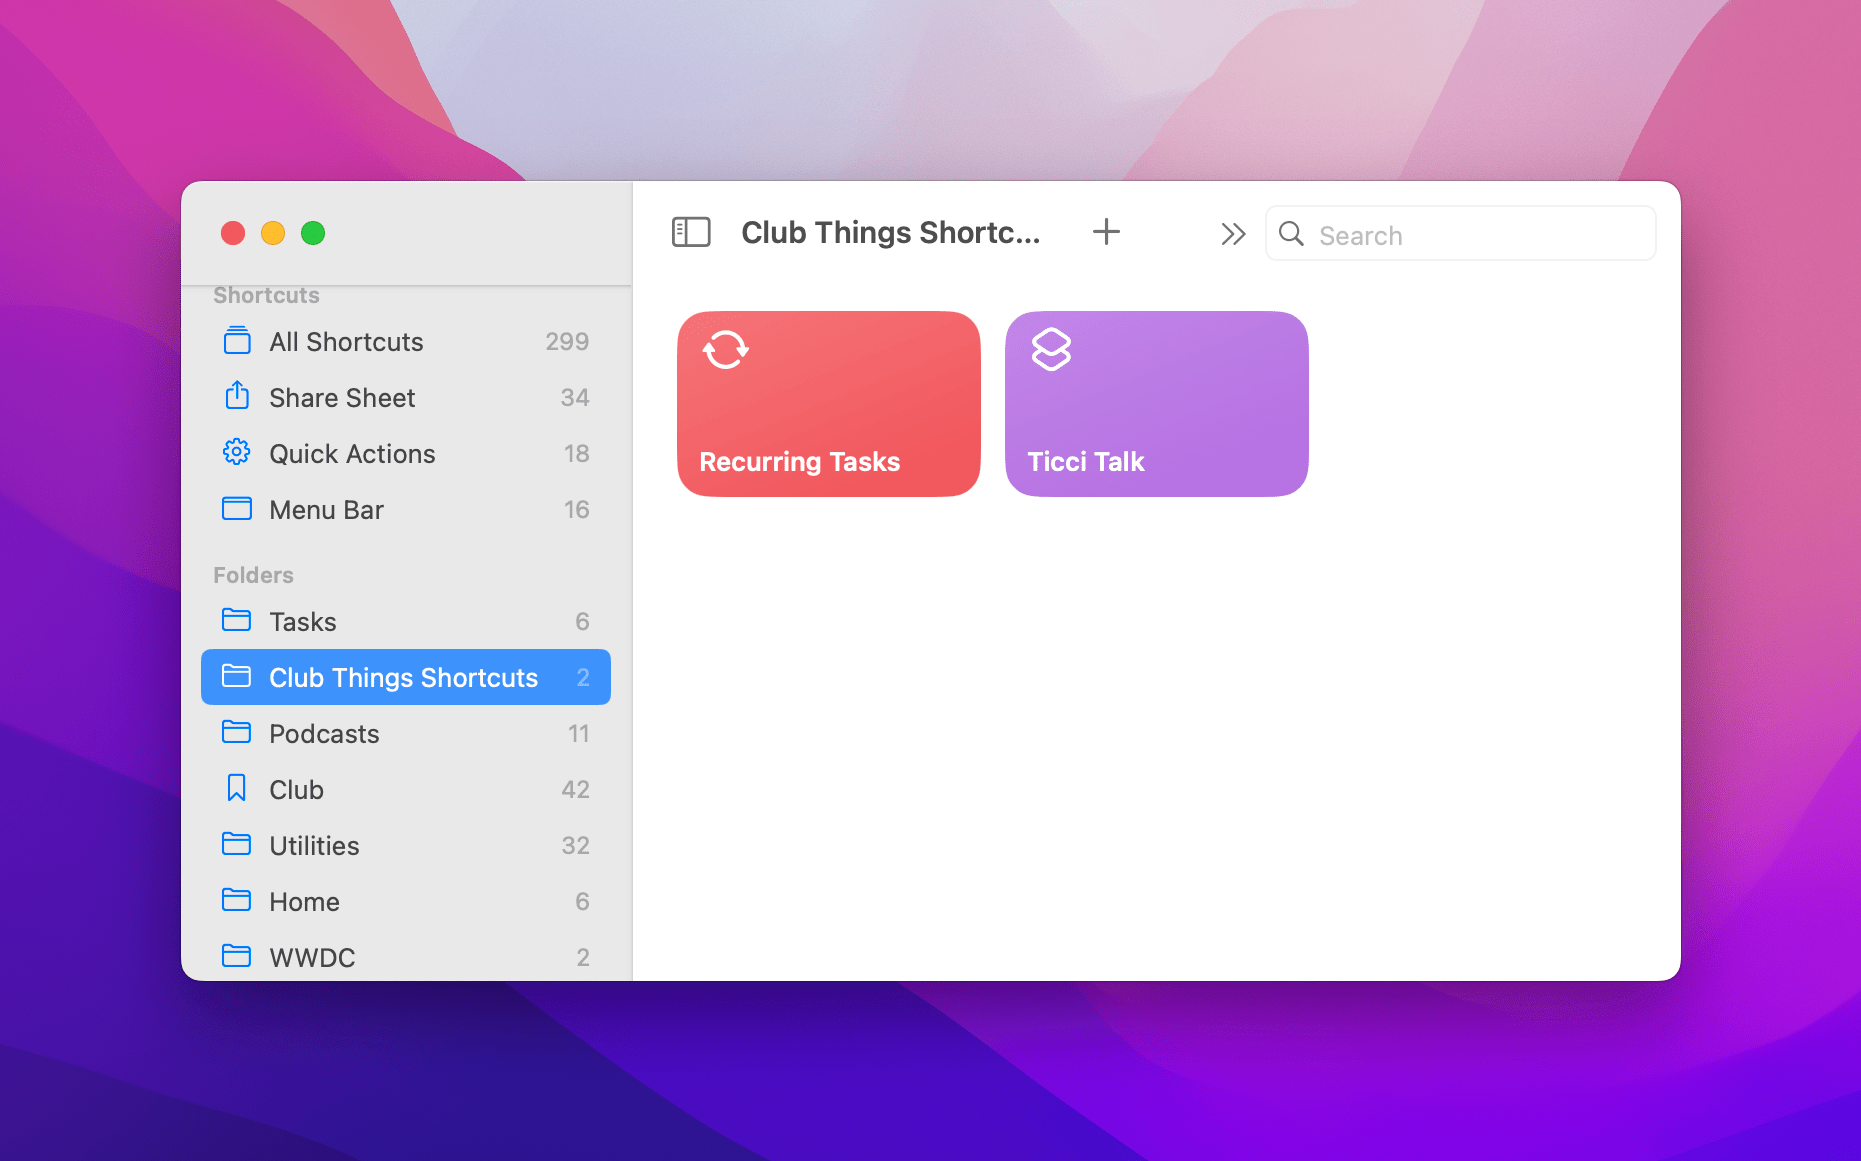 More Things shortcuts coming Friday in MacStories Weekly.